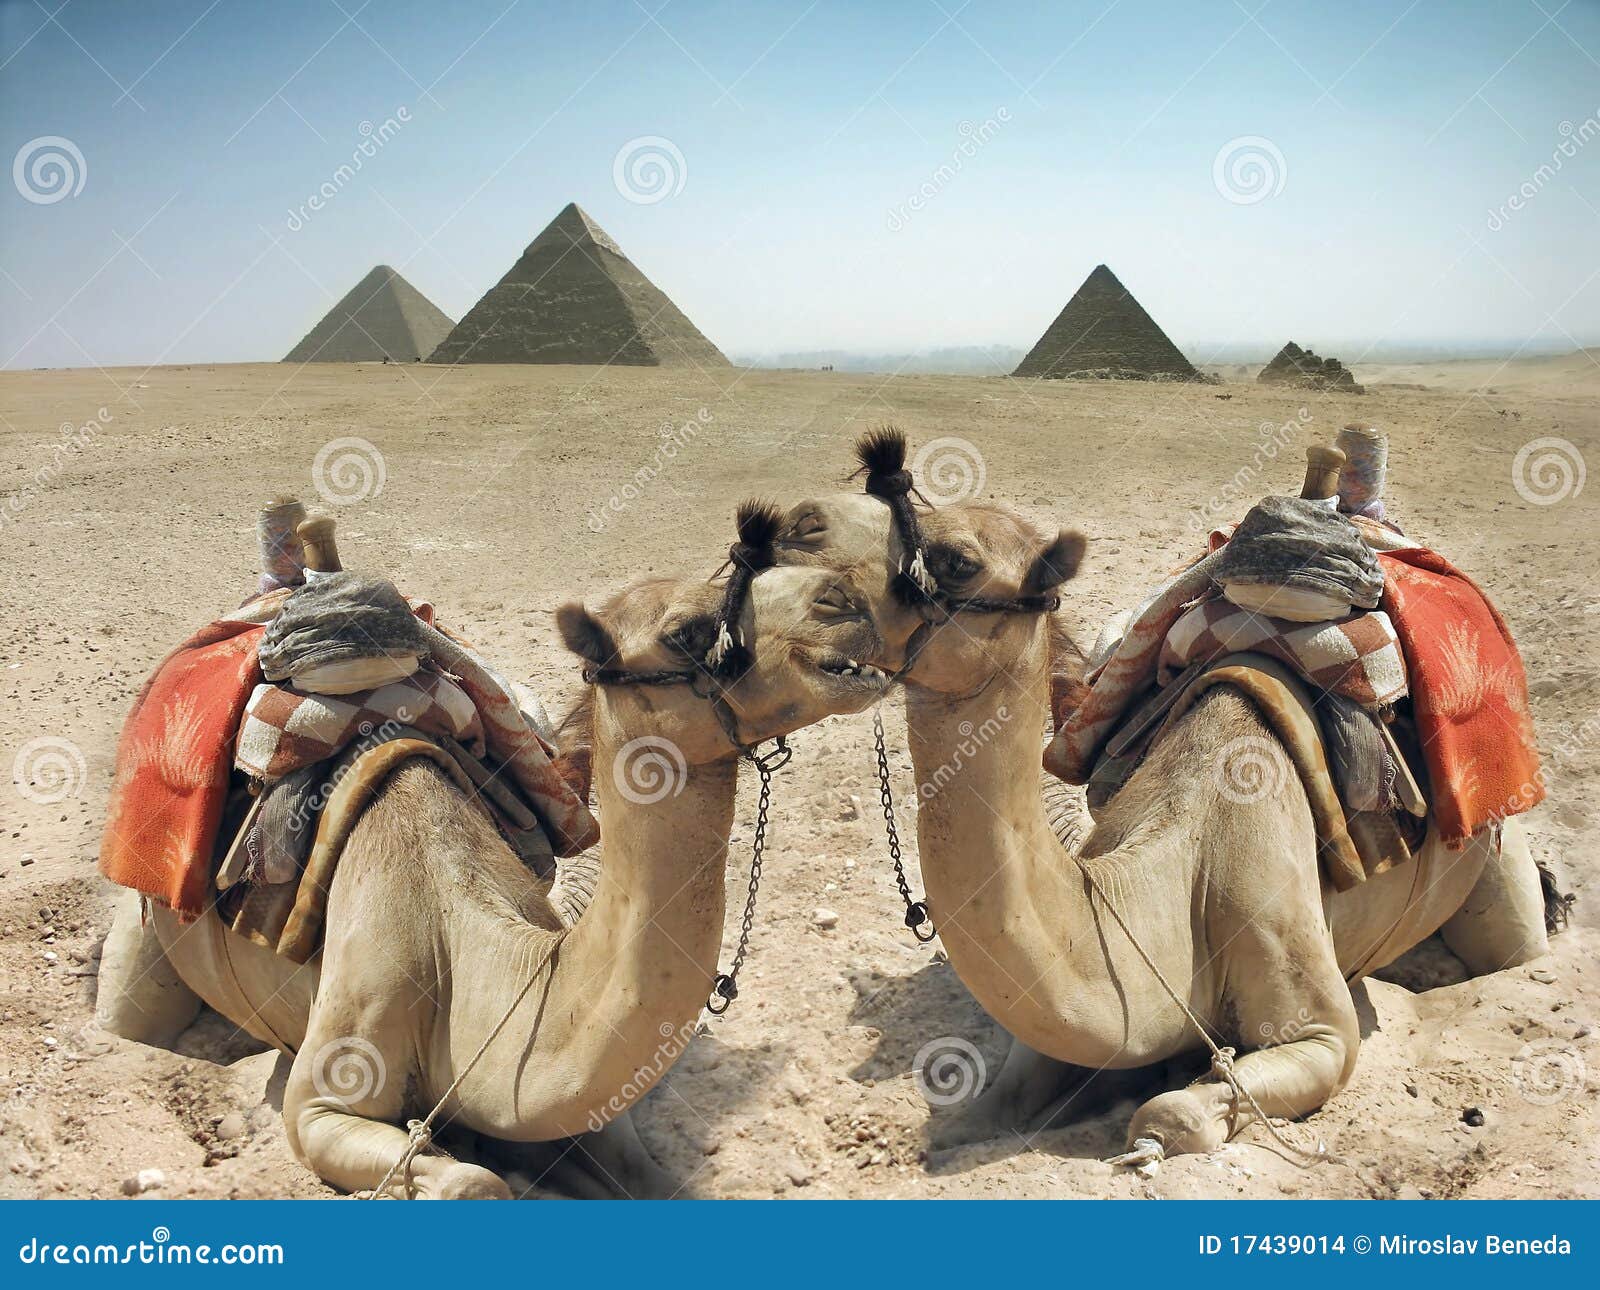 camels and pyramid in egypt